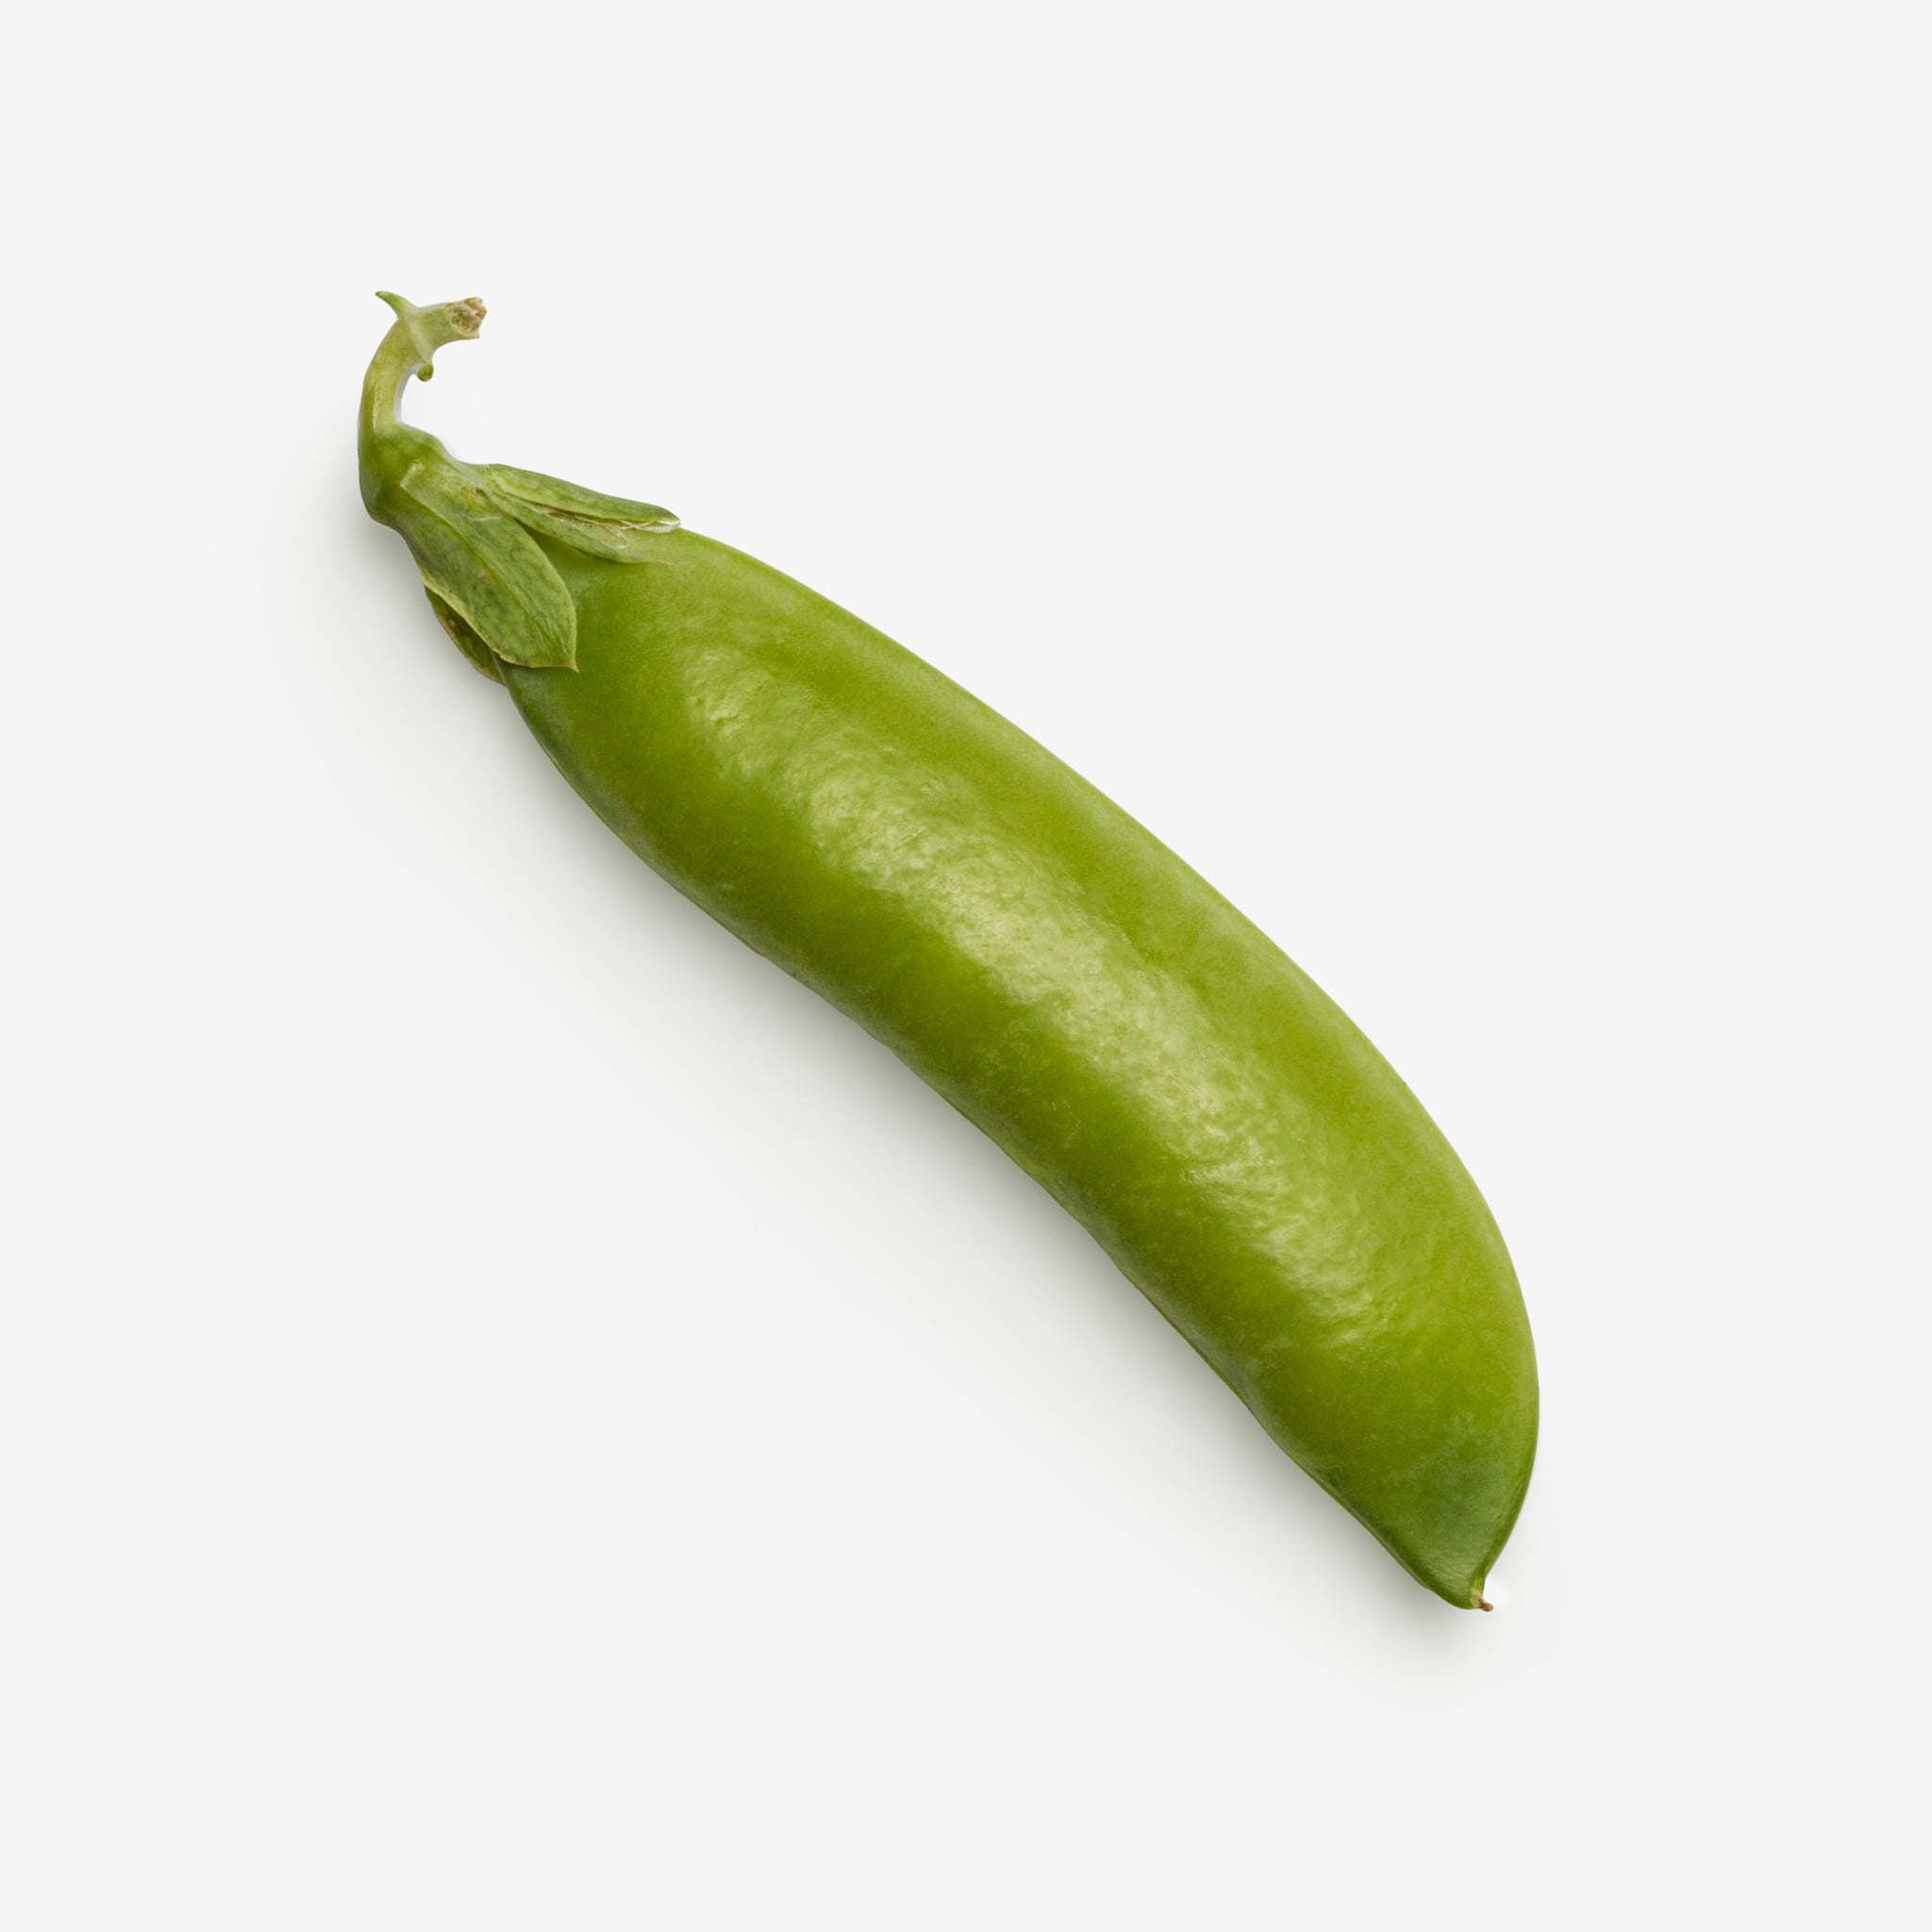 Green Pea image with transparent background